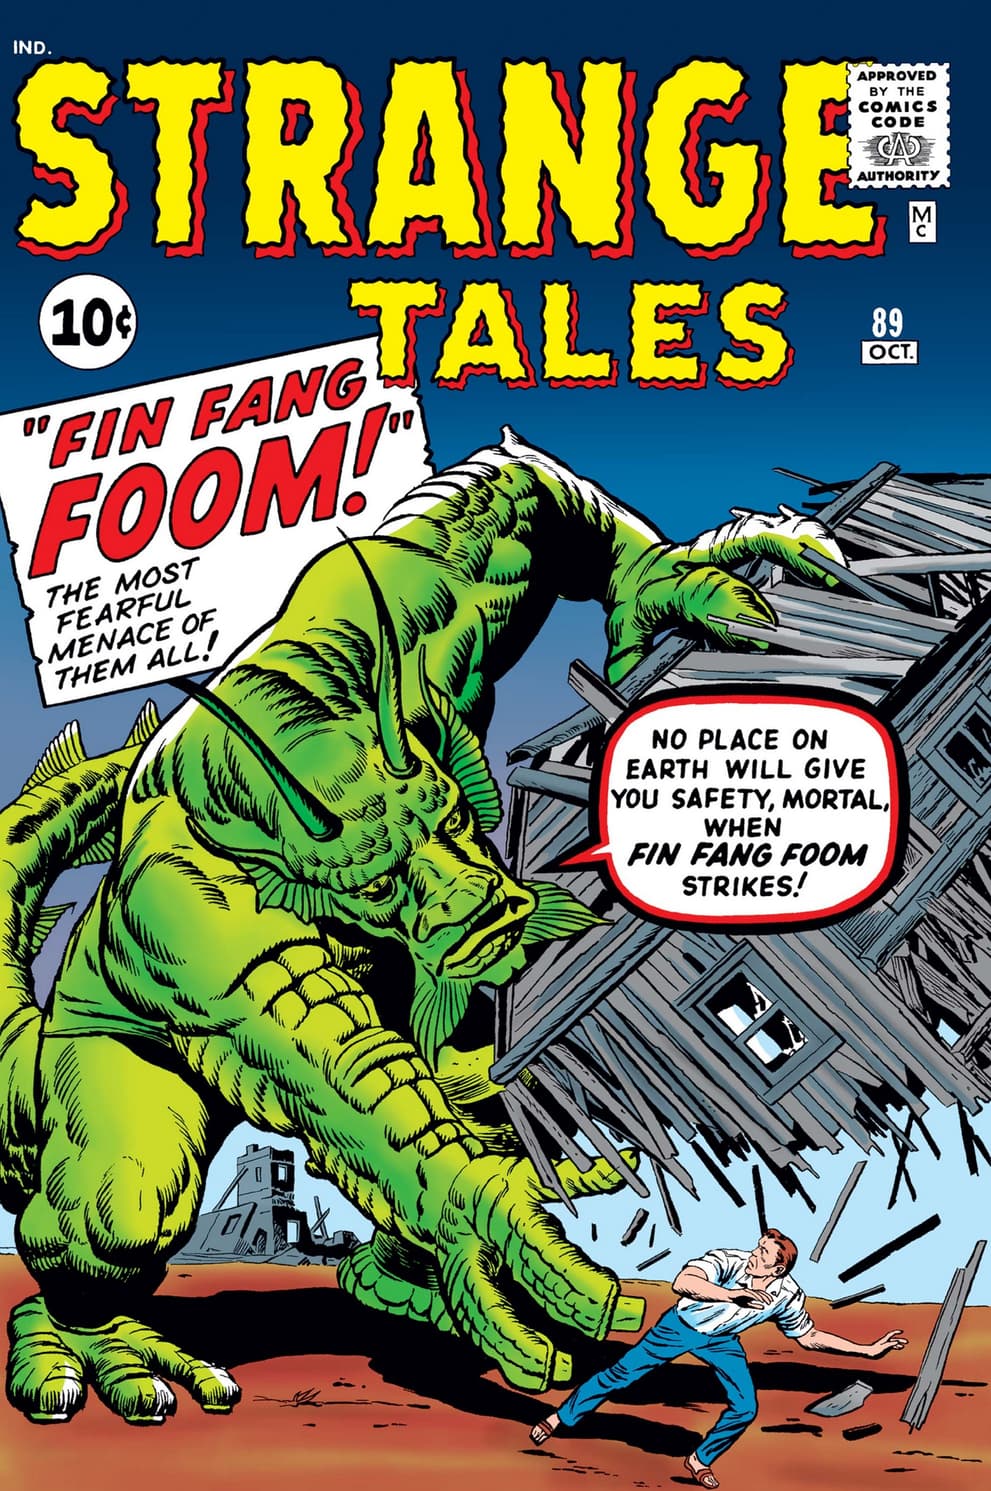 STRANGE TALES (1951) #89 page by Jack Kirby, Dick Ayers, and Stan Goldberg